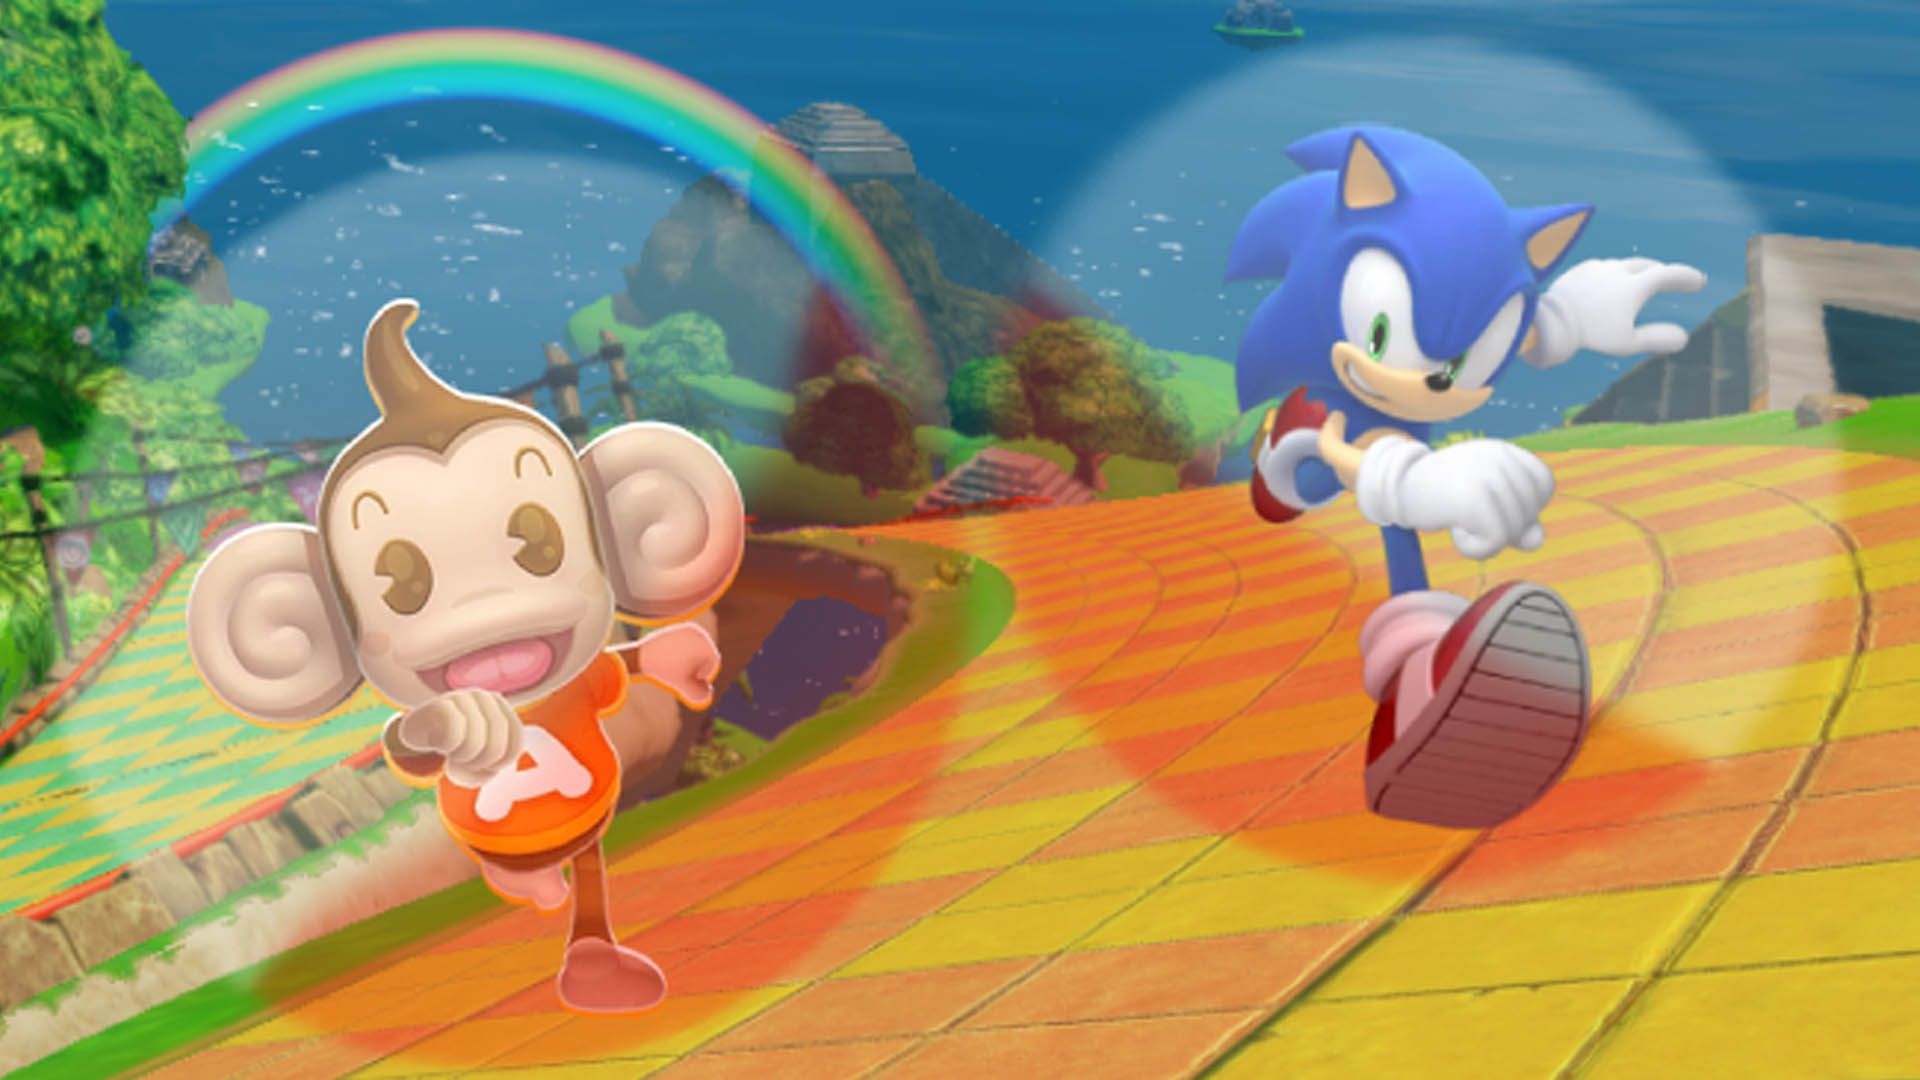 Sonic the Hedgehog may be rolling his way into Super Monkey Ball